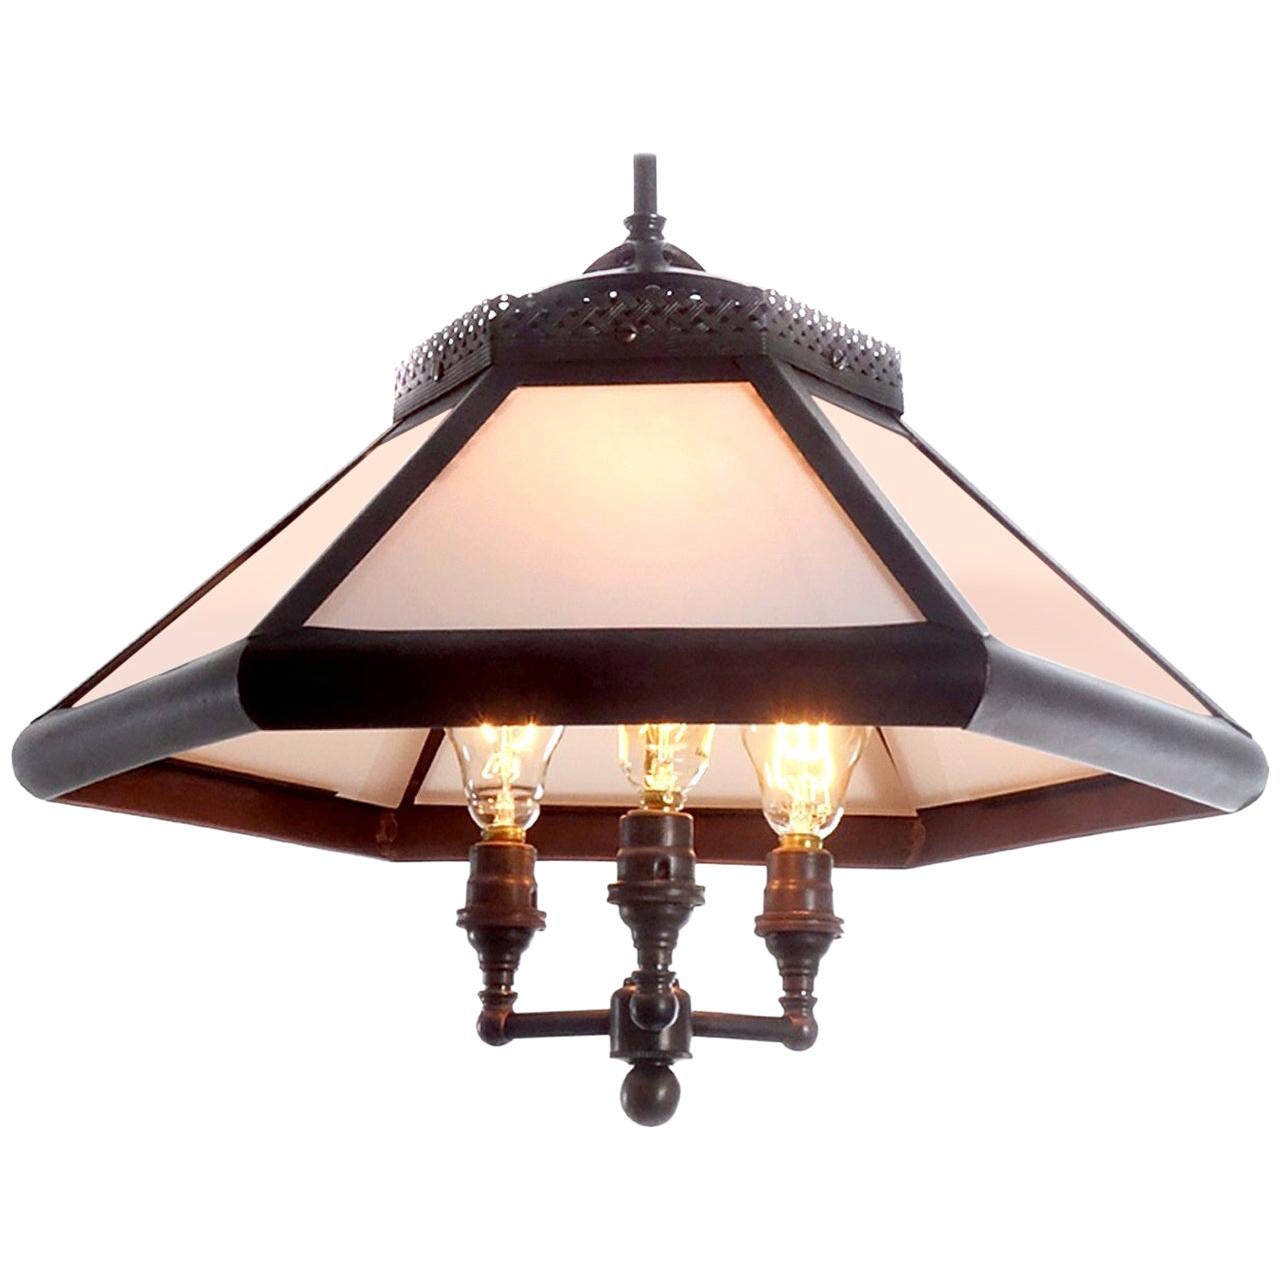 Six-Panel Gas Lamp, Copper and Milk Glass